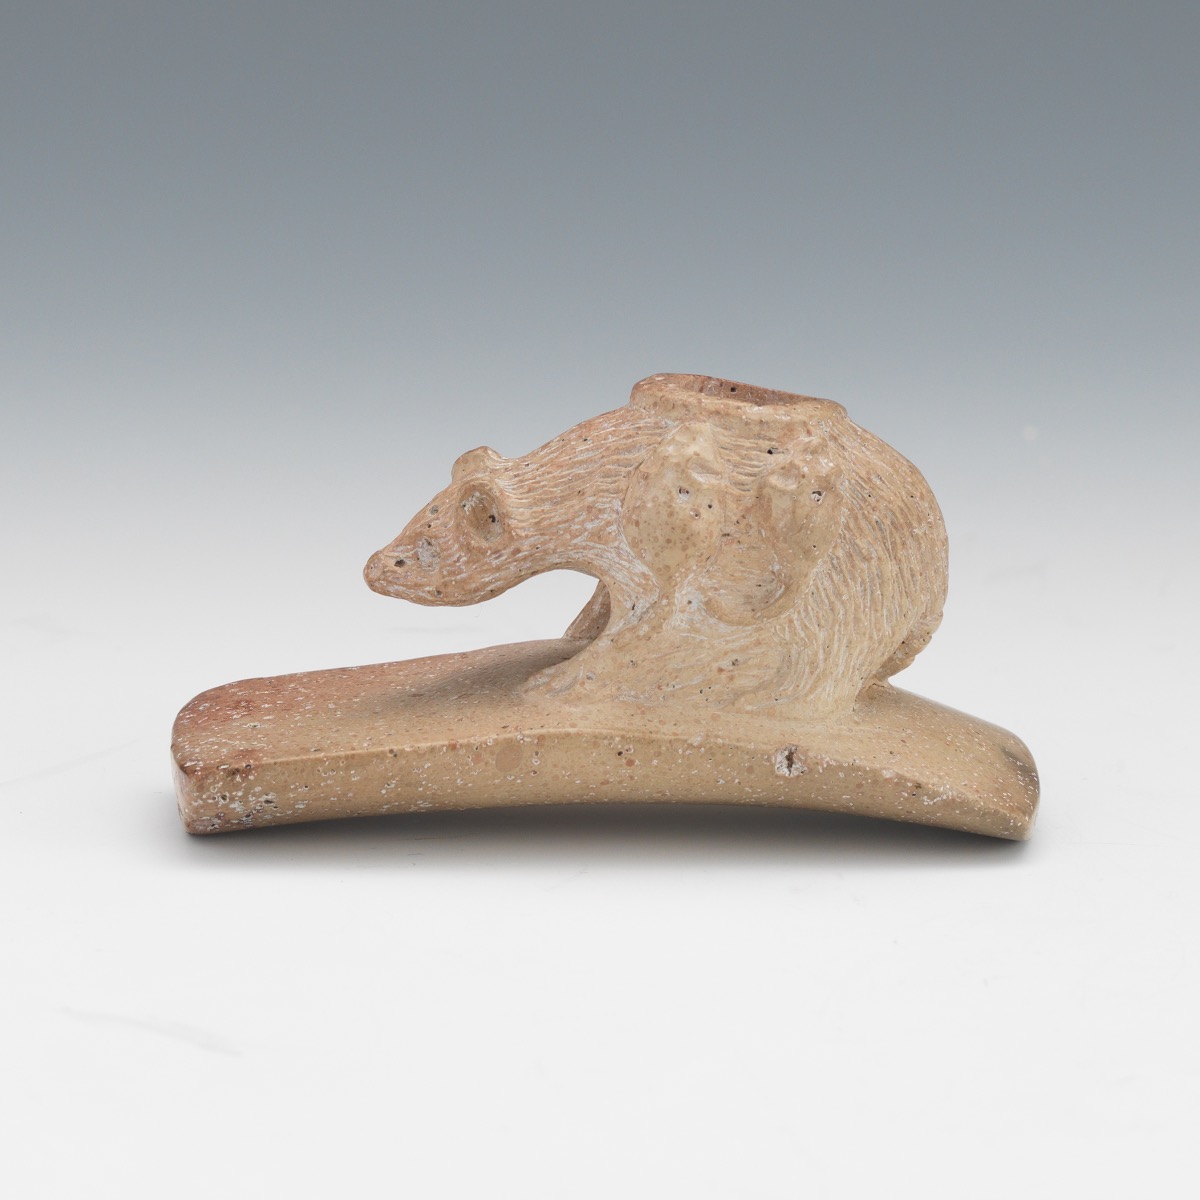 Carved Effigy Pipe of an Opssom - Image 4 of 7